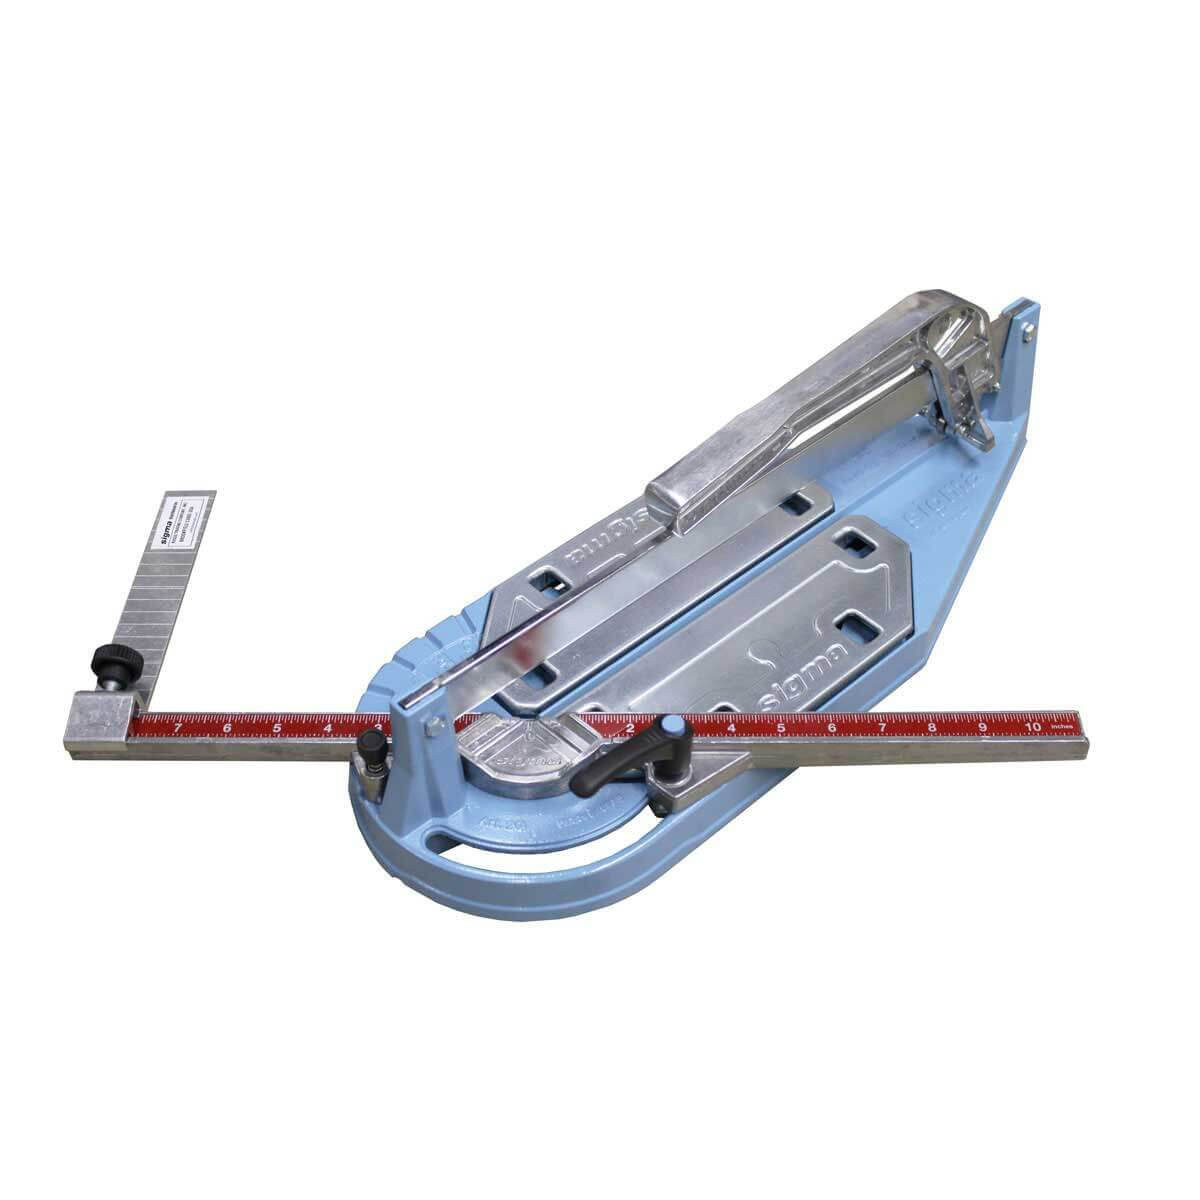 Sigma 2G 14" Tile Cutter - Tile This